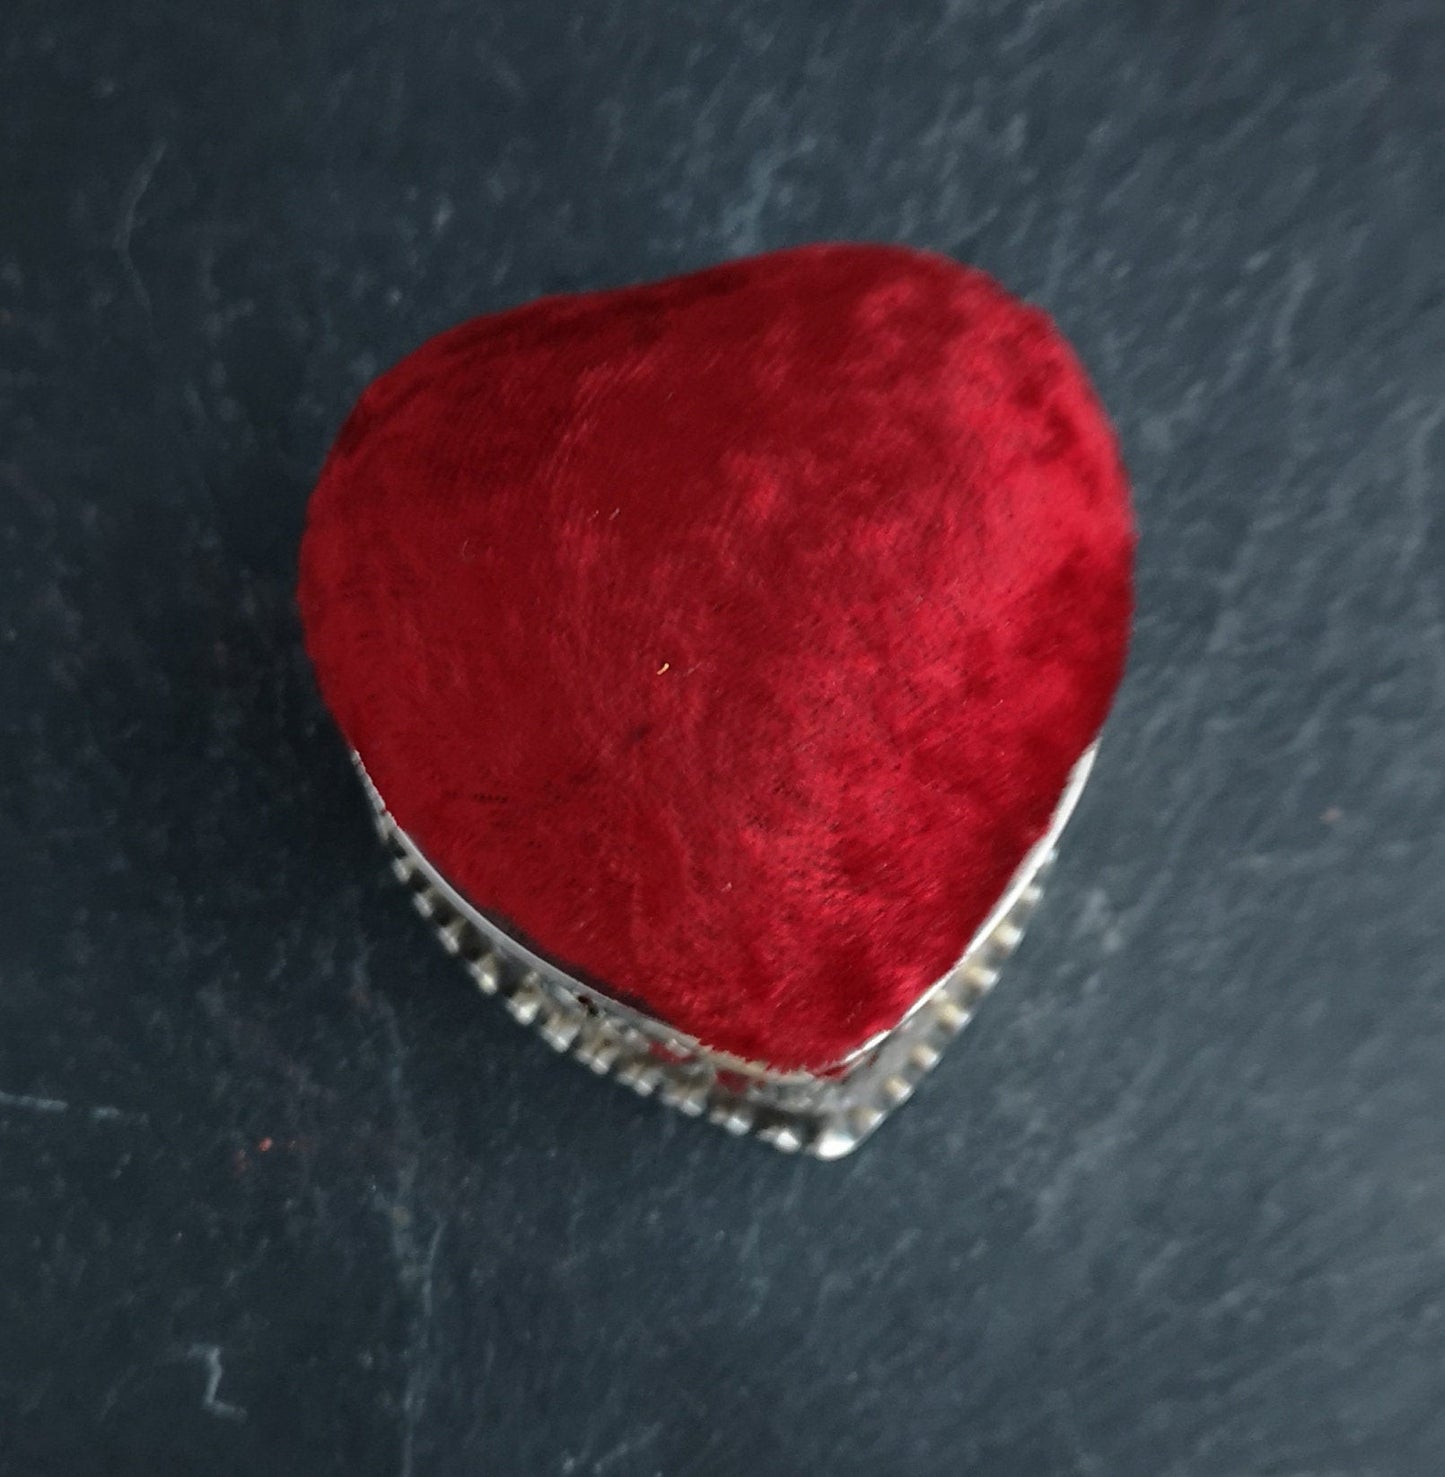 Antique Victorian silver and red velvet ring box